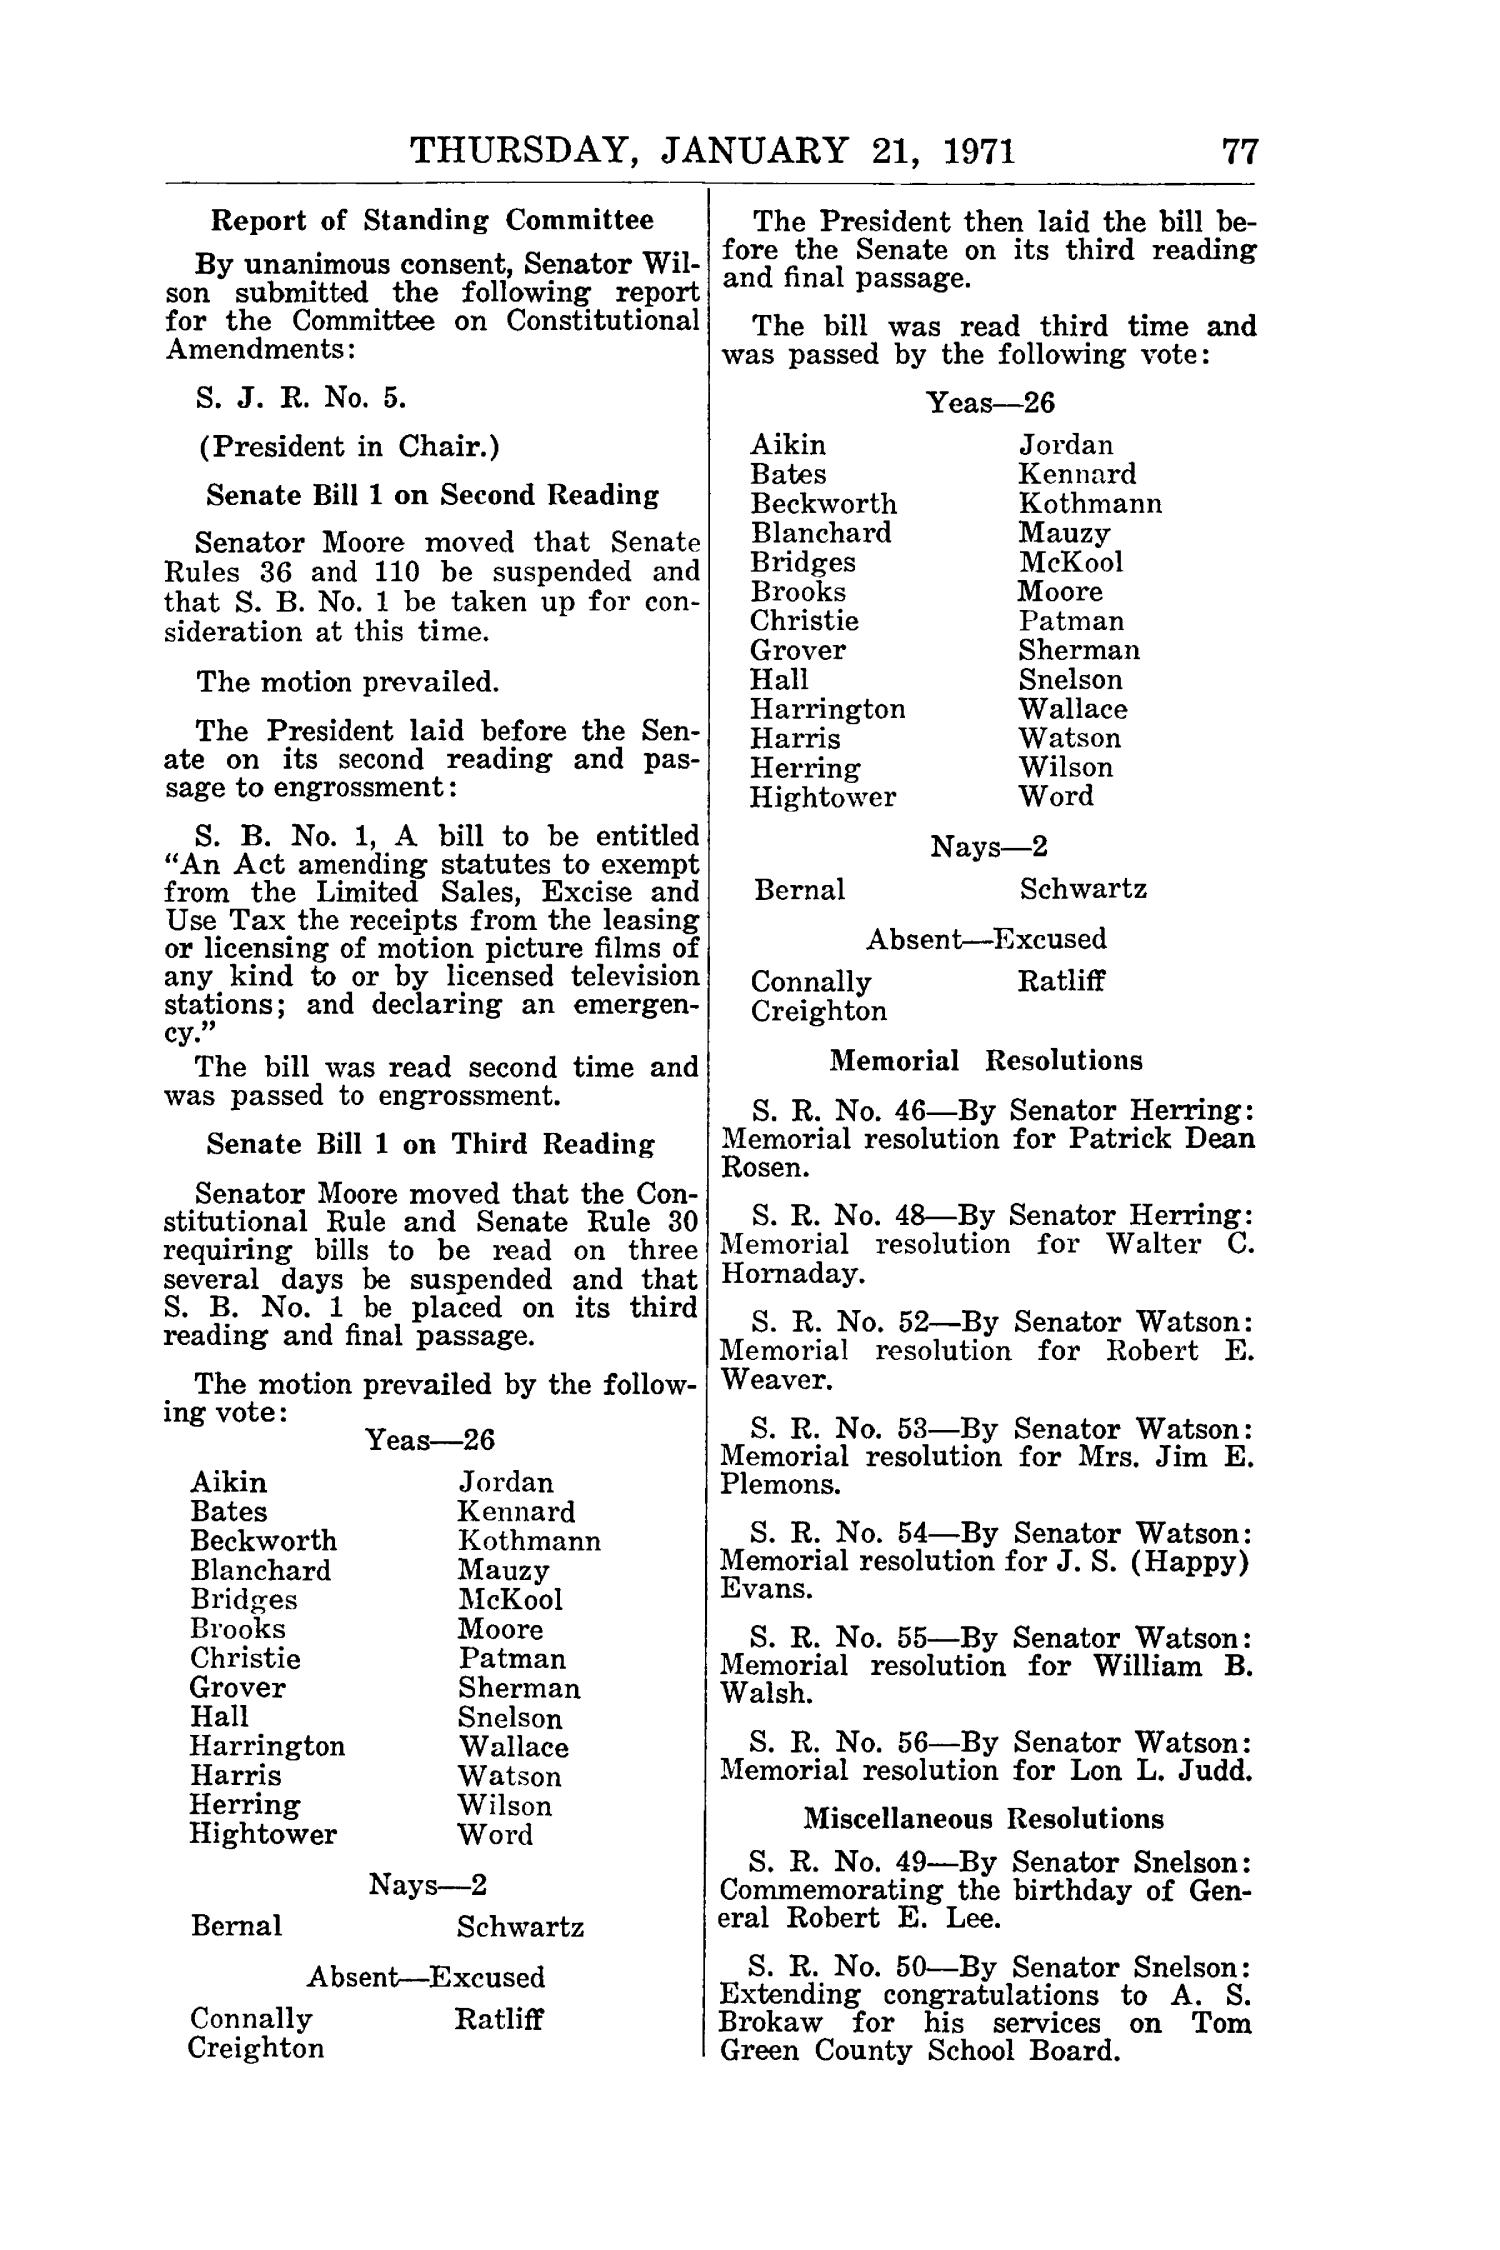 Journal of the Senate of the State of Texas, Regular Session of the Sixty-Second Legislature, Volume 1
                                                
                                                    77
                                                